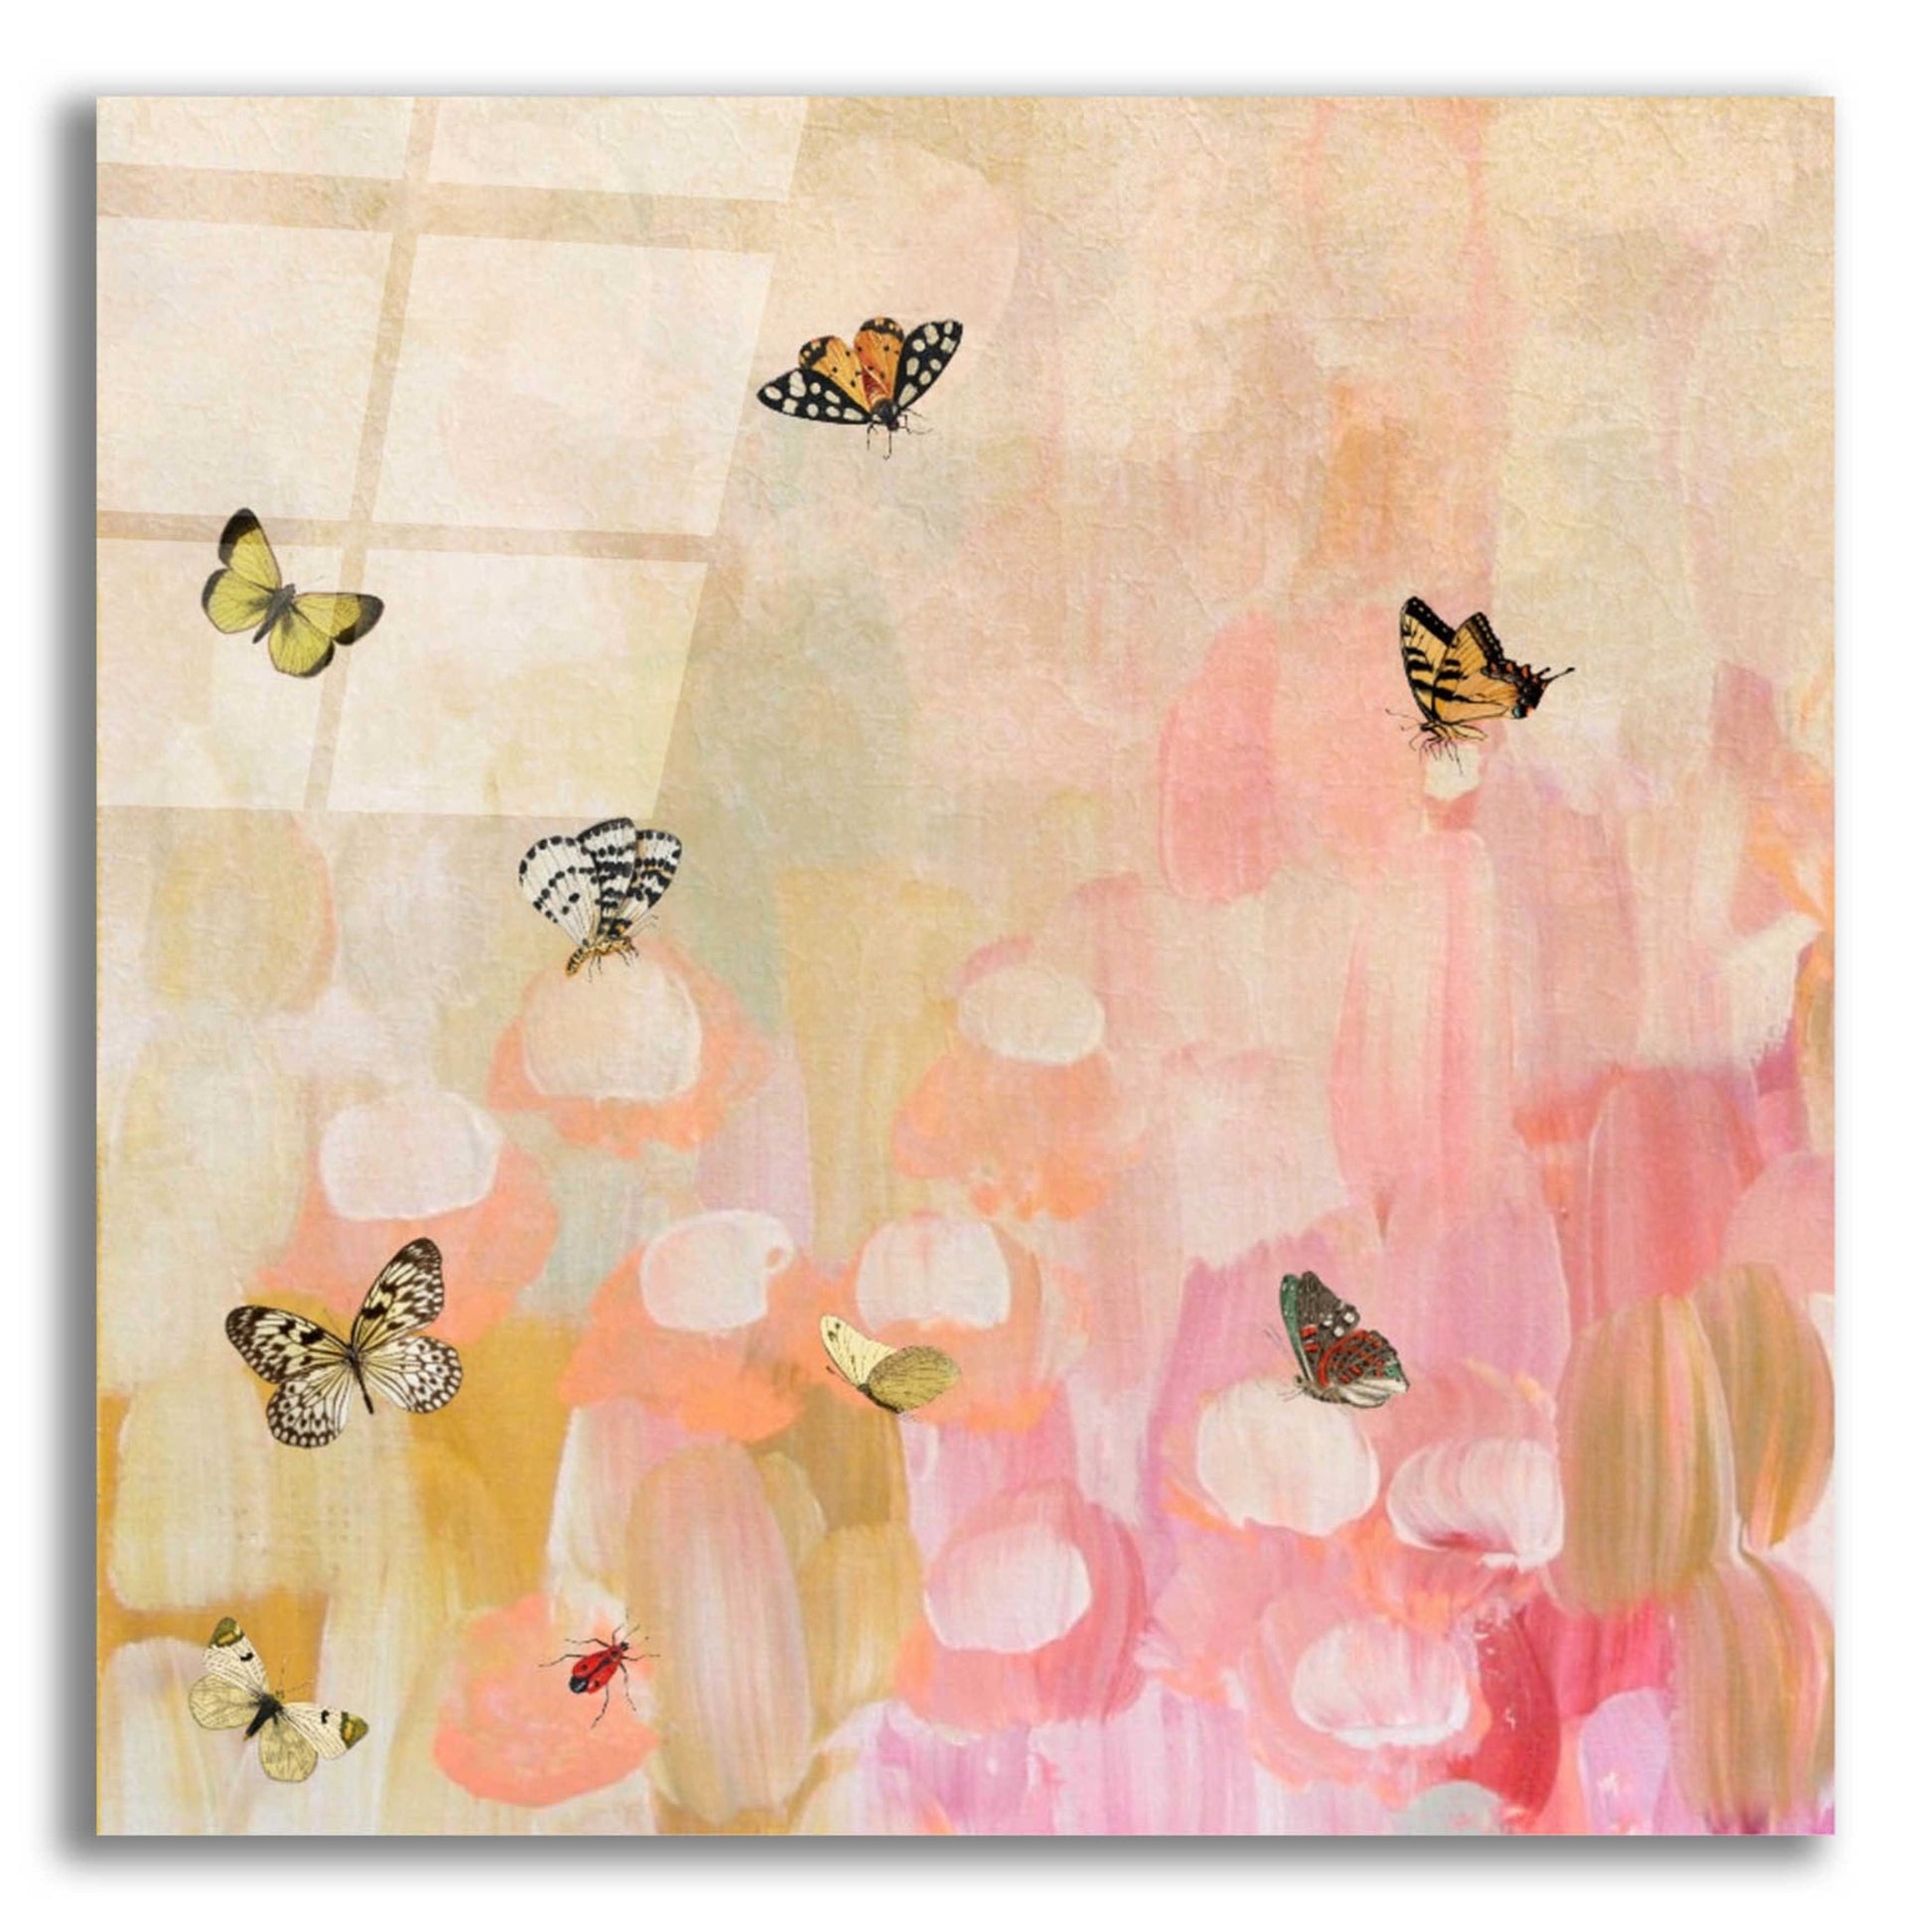 Epic Art 'Butterfly by 7' by Karen Smith Acrylic Glass Wall Art